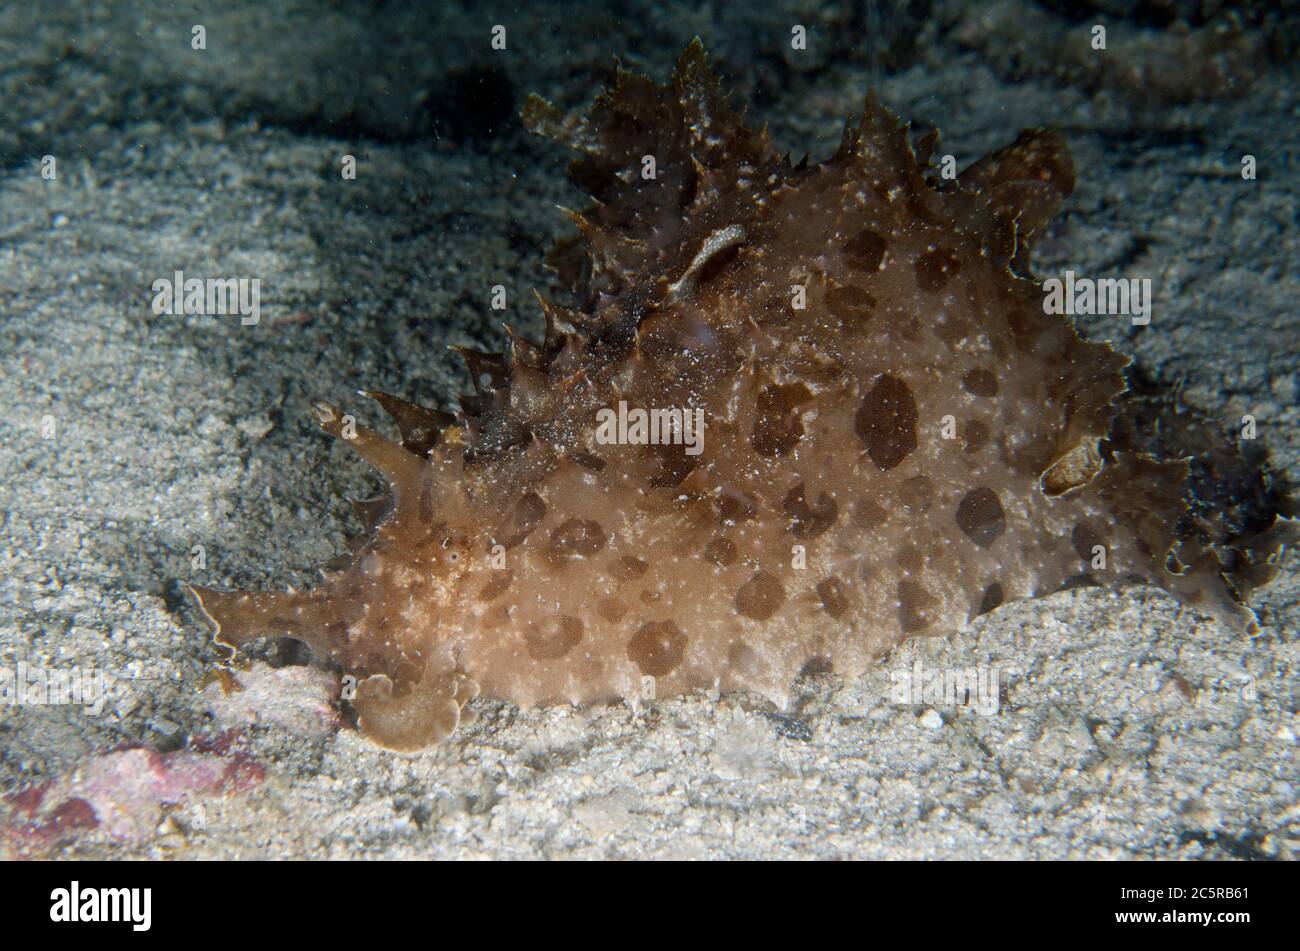 Spotted Sea Hare, Aplysia argus, on sand, night dive, Sakokreng Jetty dive site, Dampier Strait, Raja Ampat, Indonesia Stock Photo